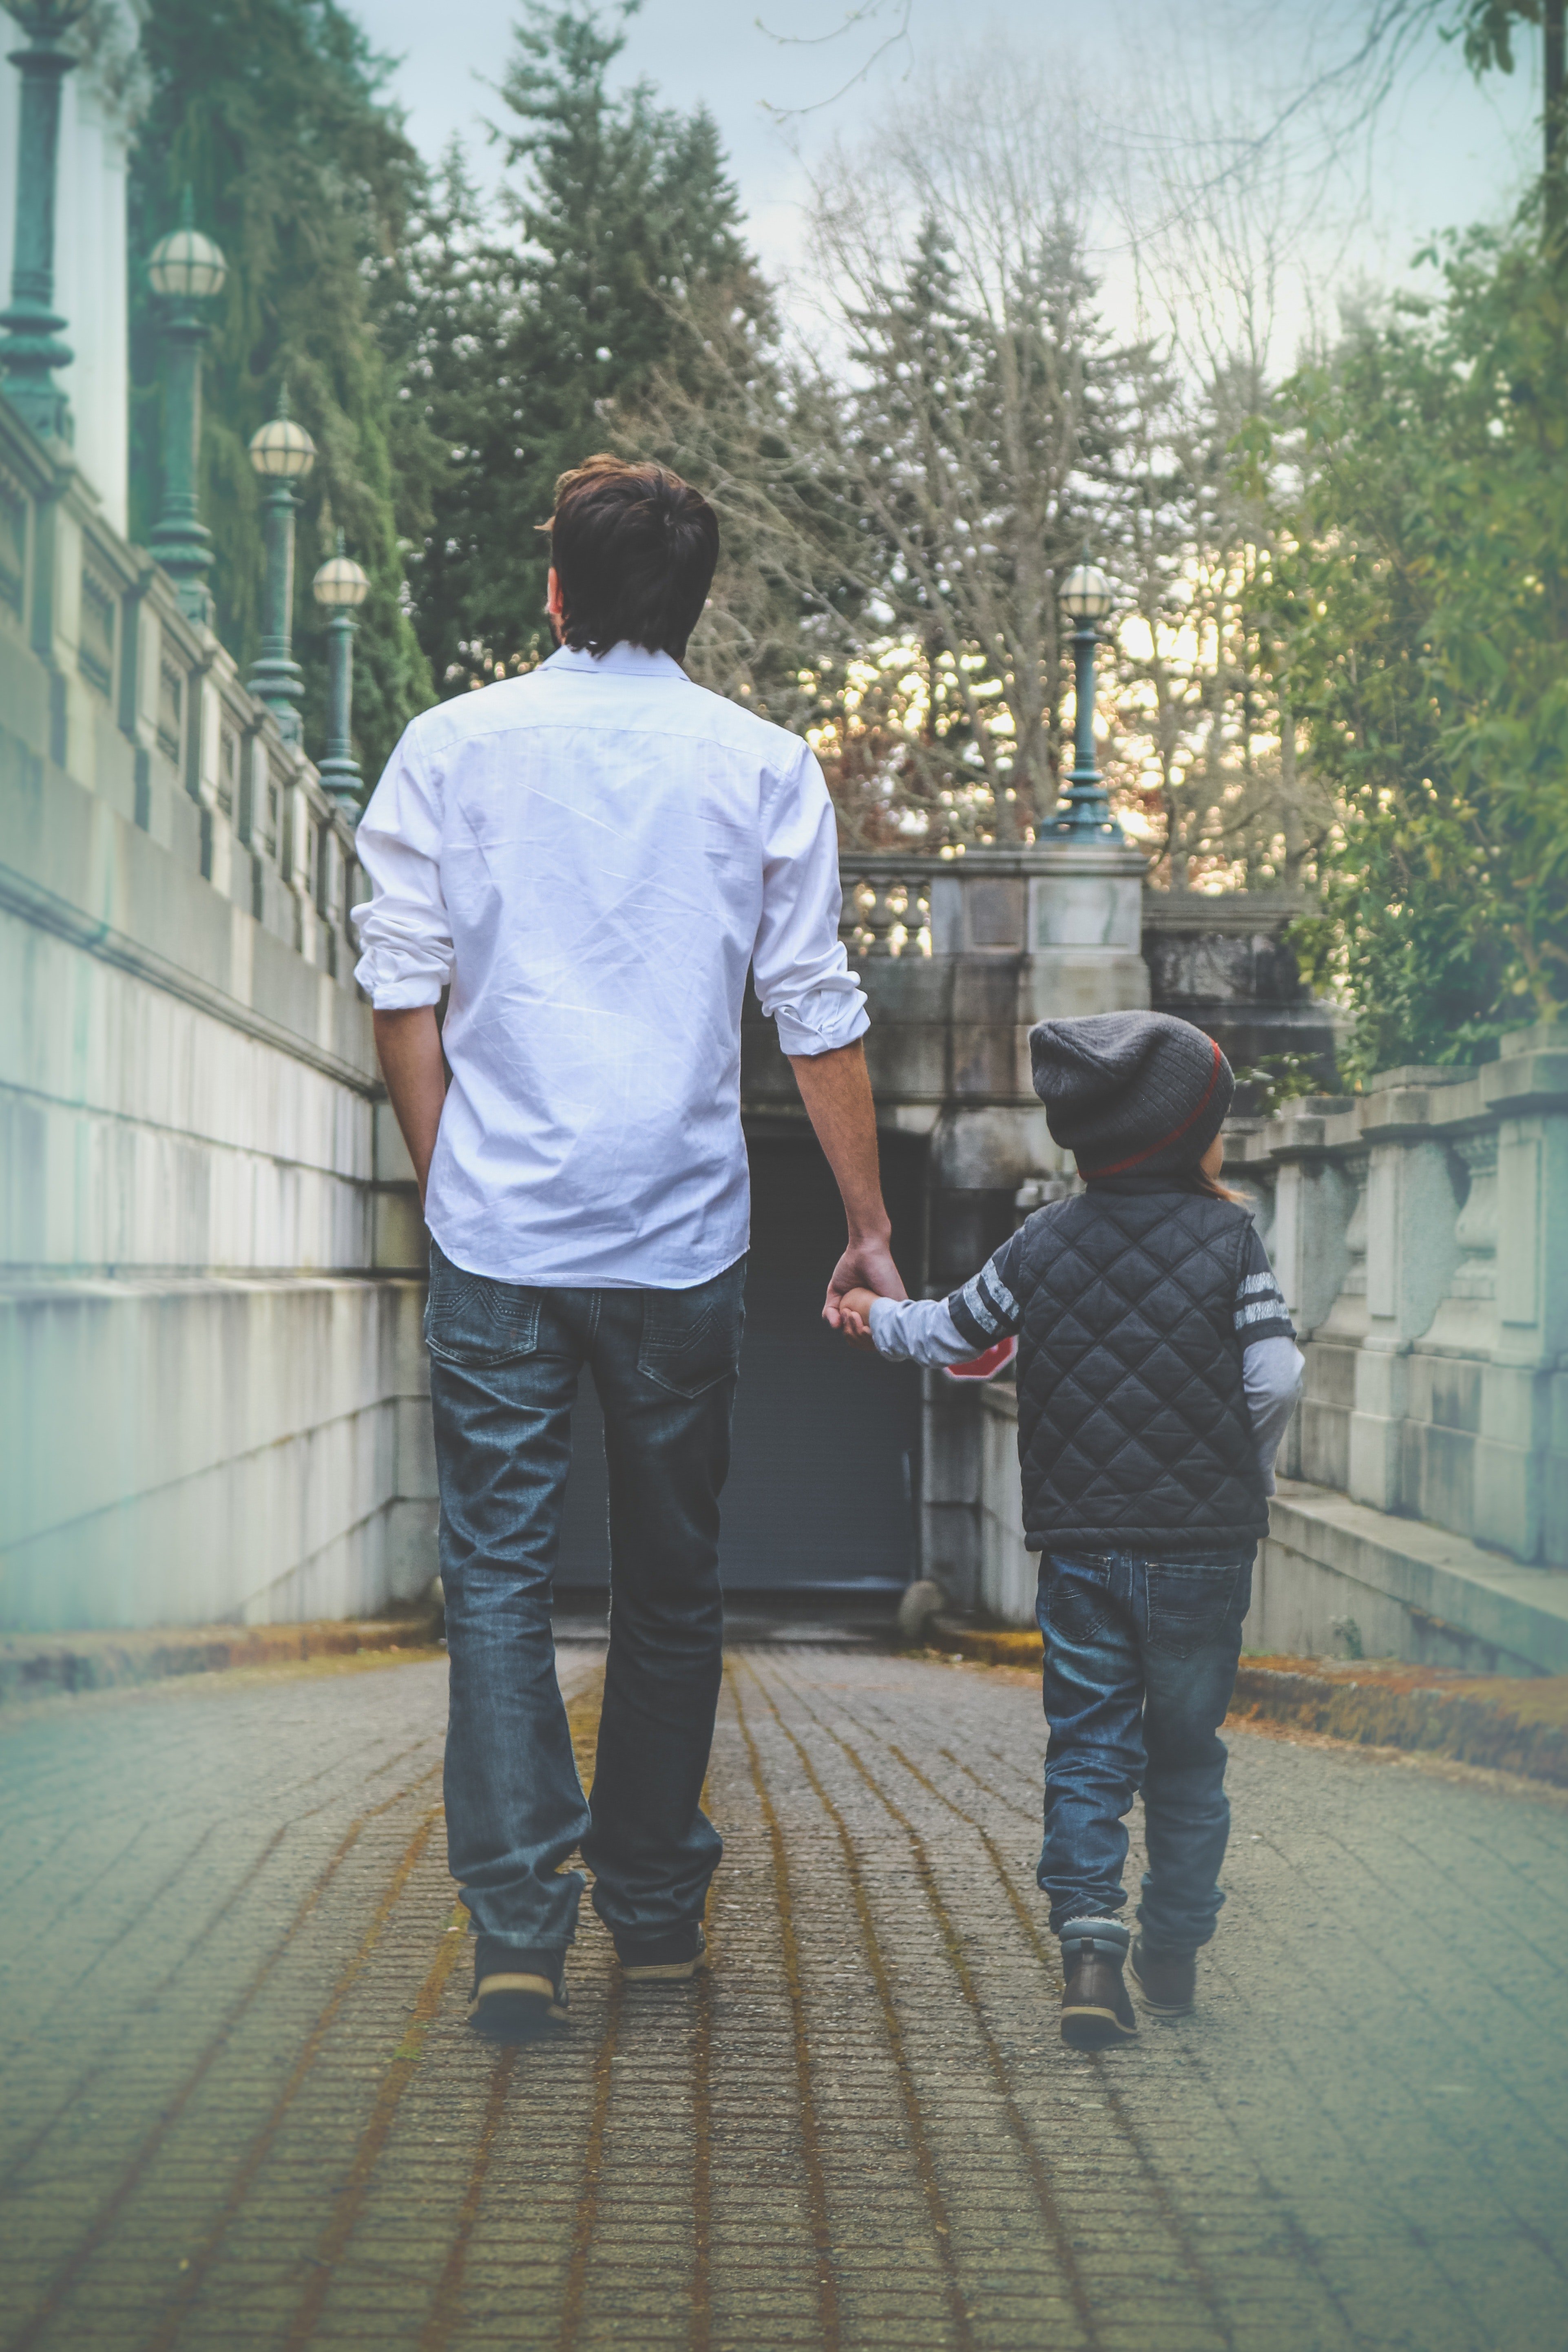 Father and son taking a walk. | Photo: Pexels